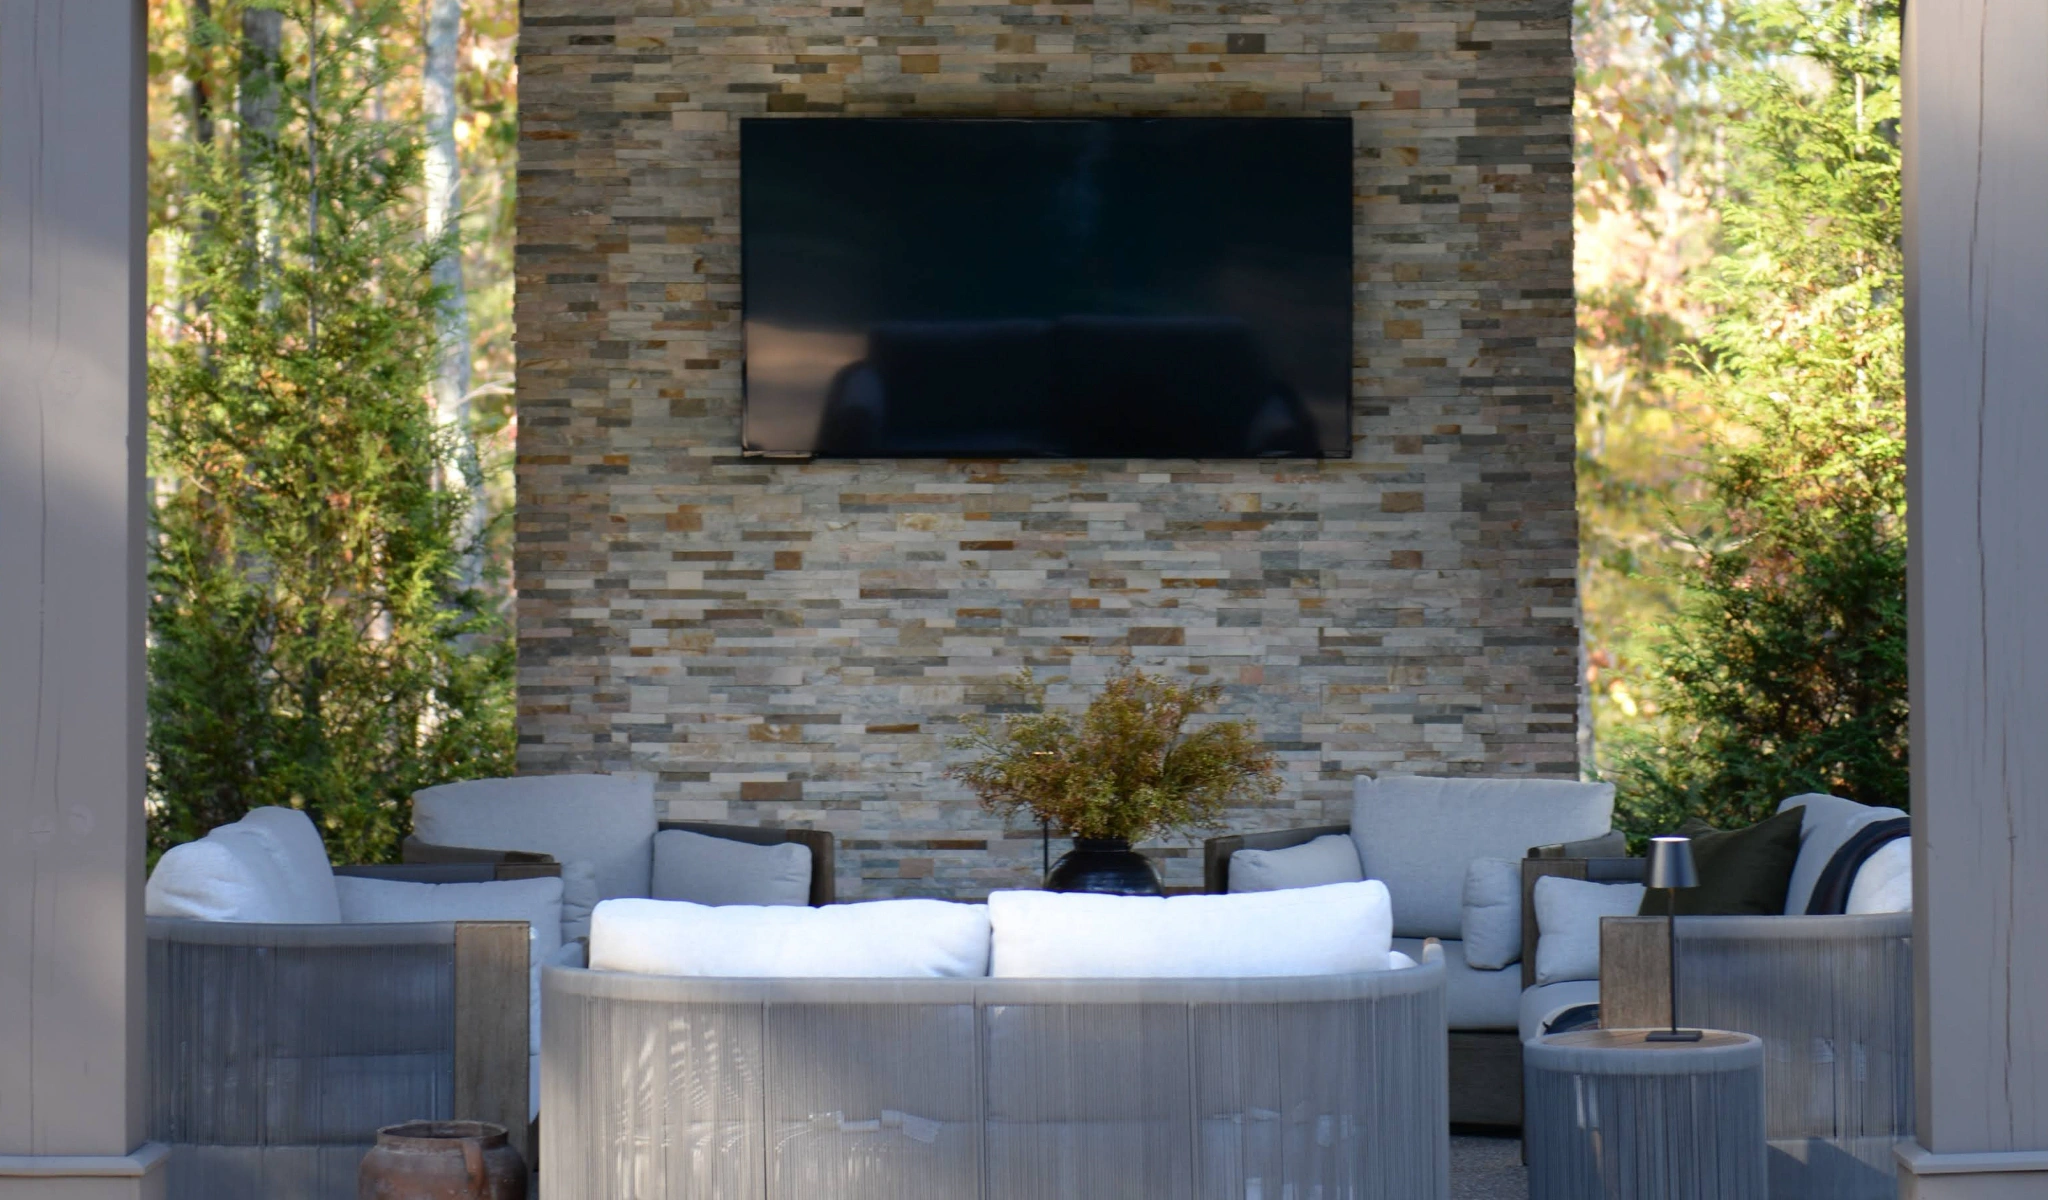 An outdoor living area with a TV mounted on a stone wall.